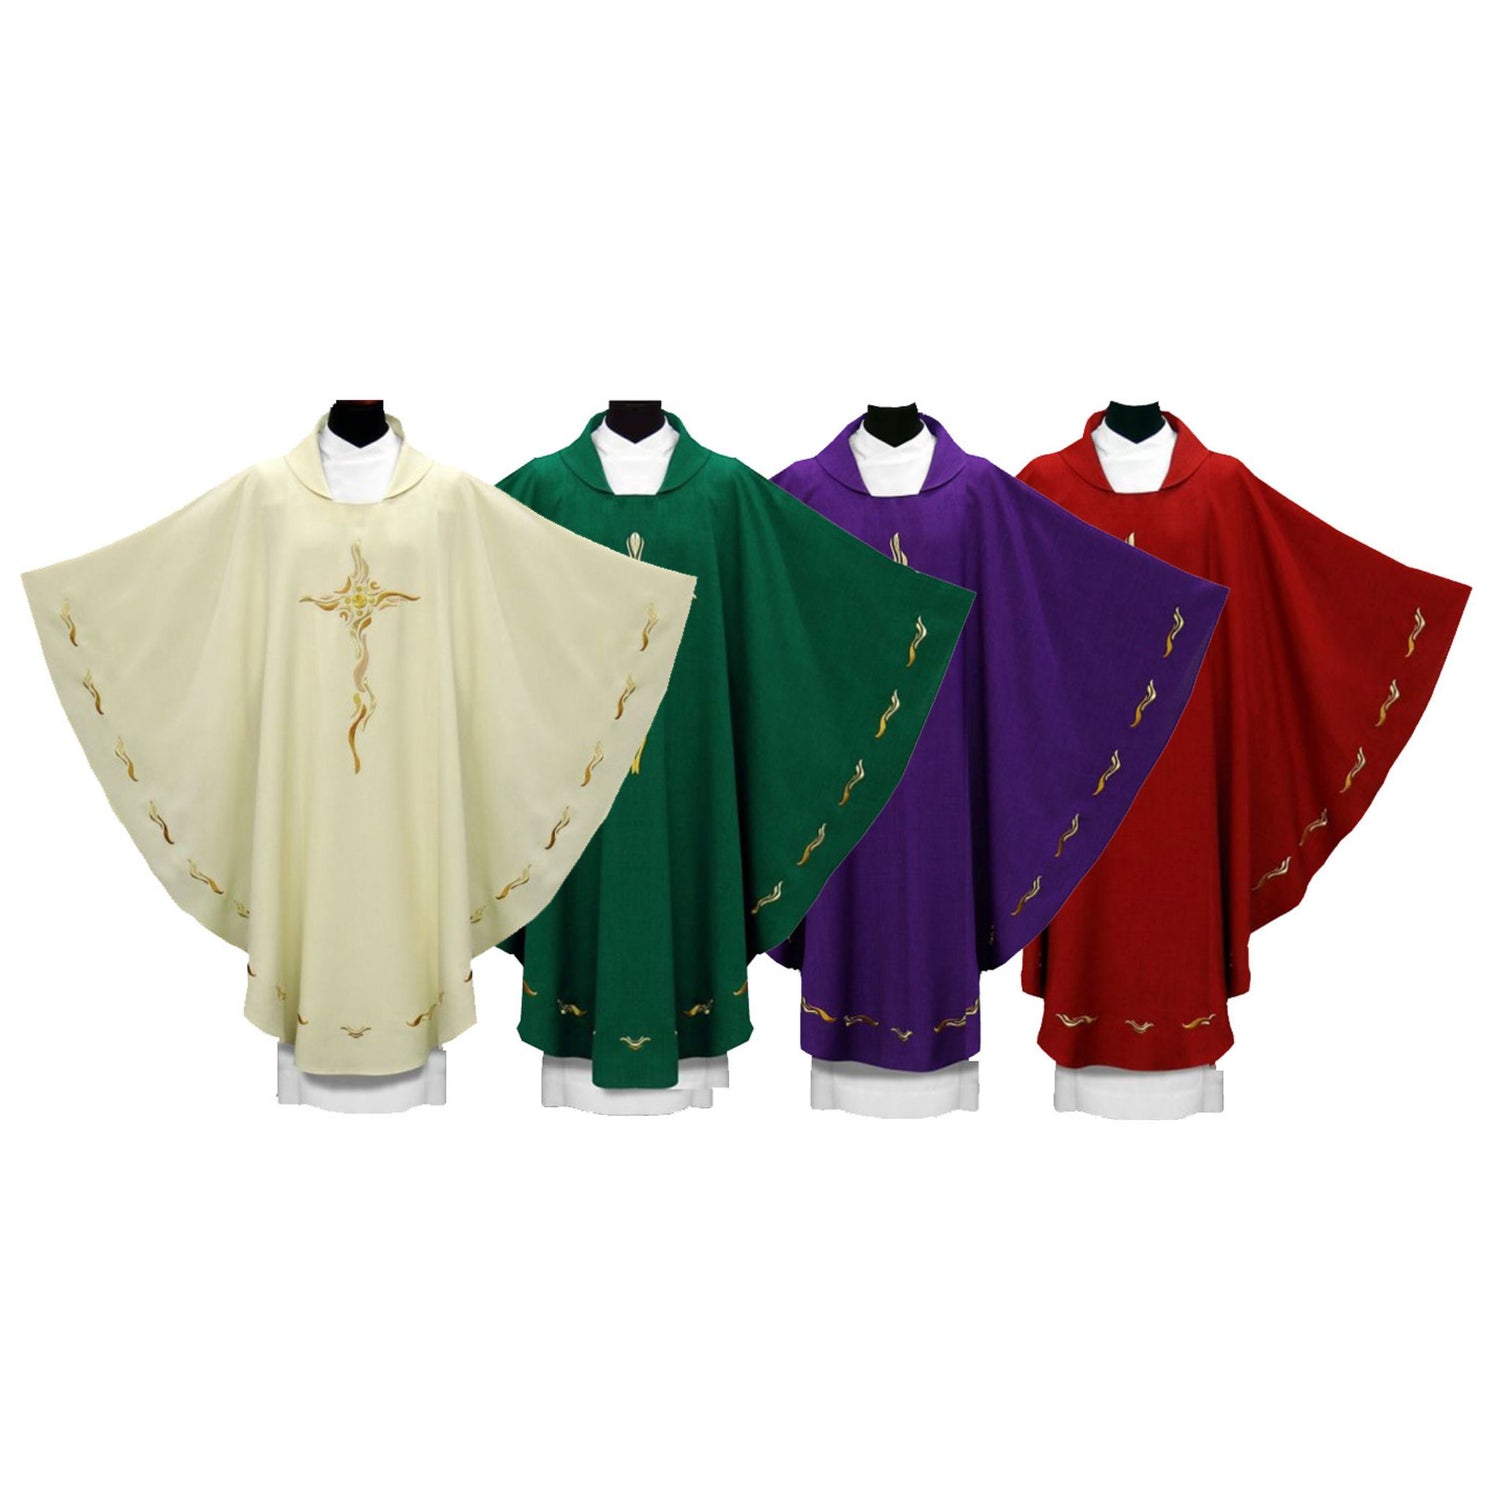  European elegance embodied: meticulously crafted chasubles.